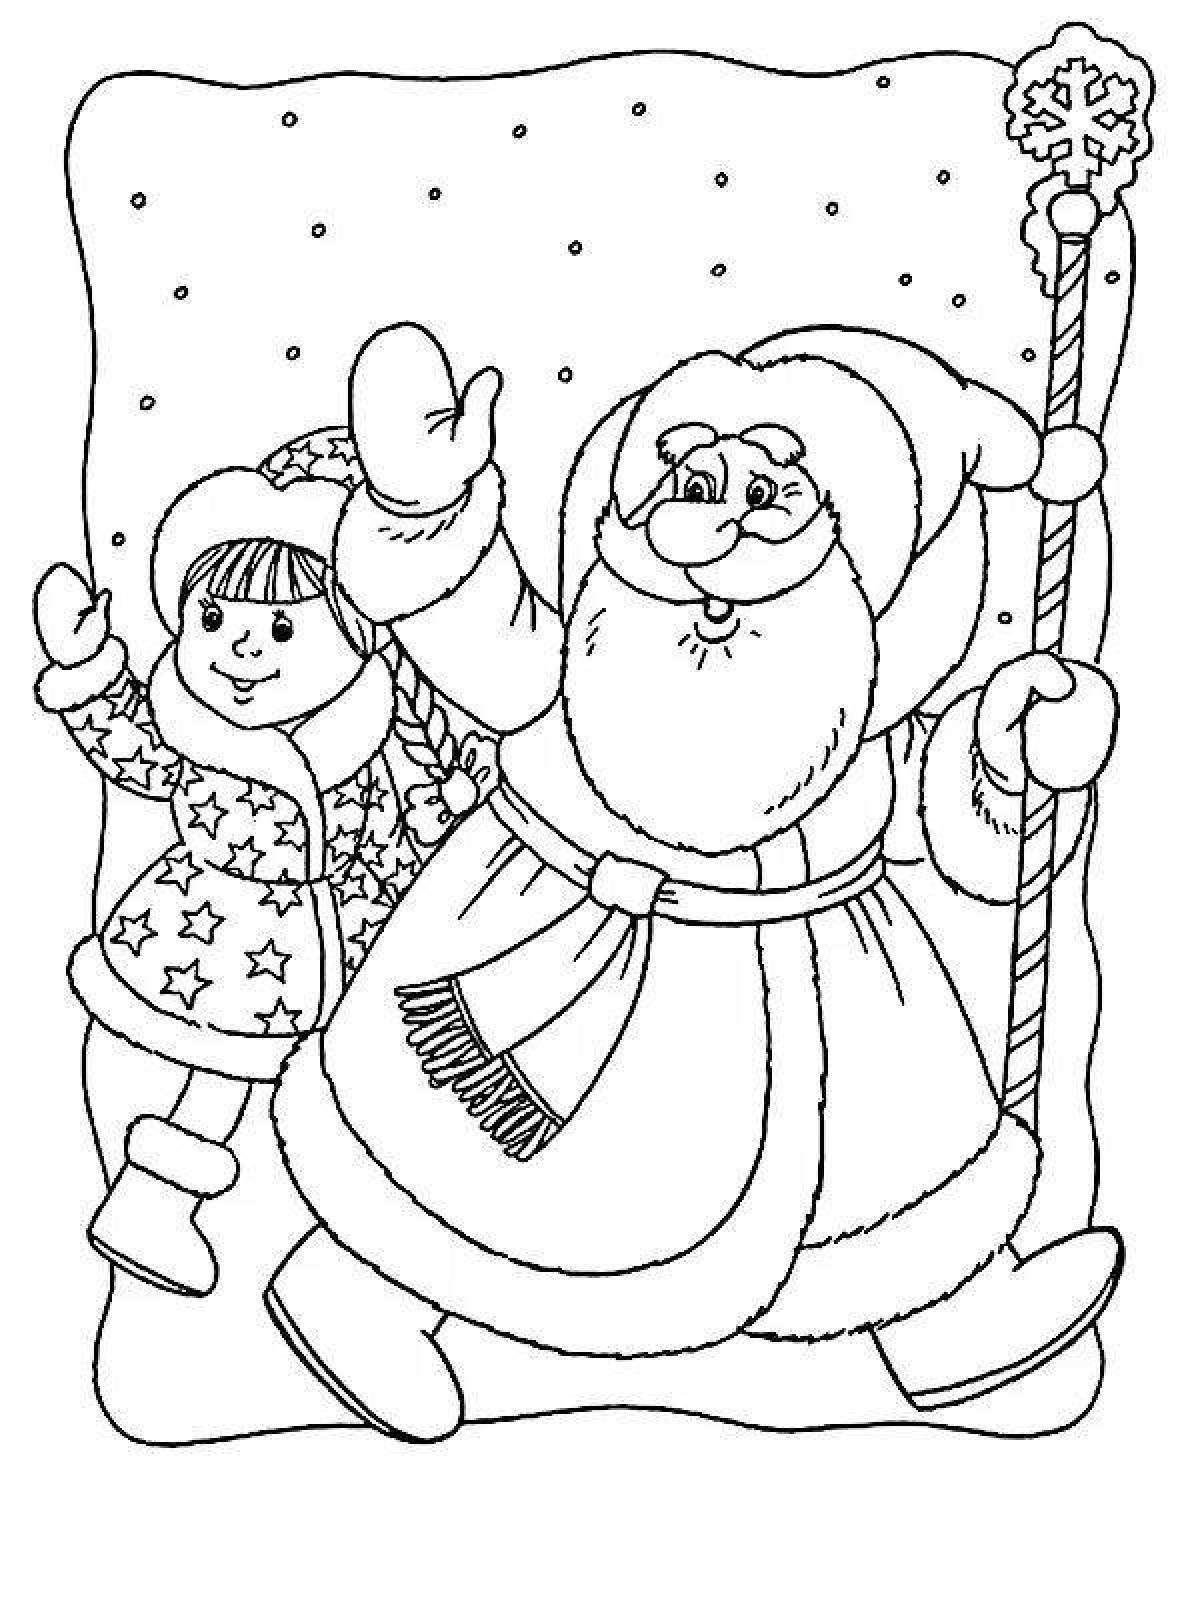 Colorful coloring Santa Claus and Snow Maiden